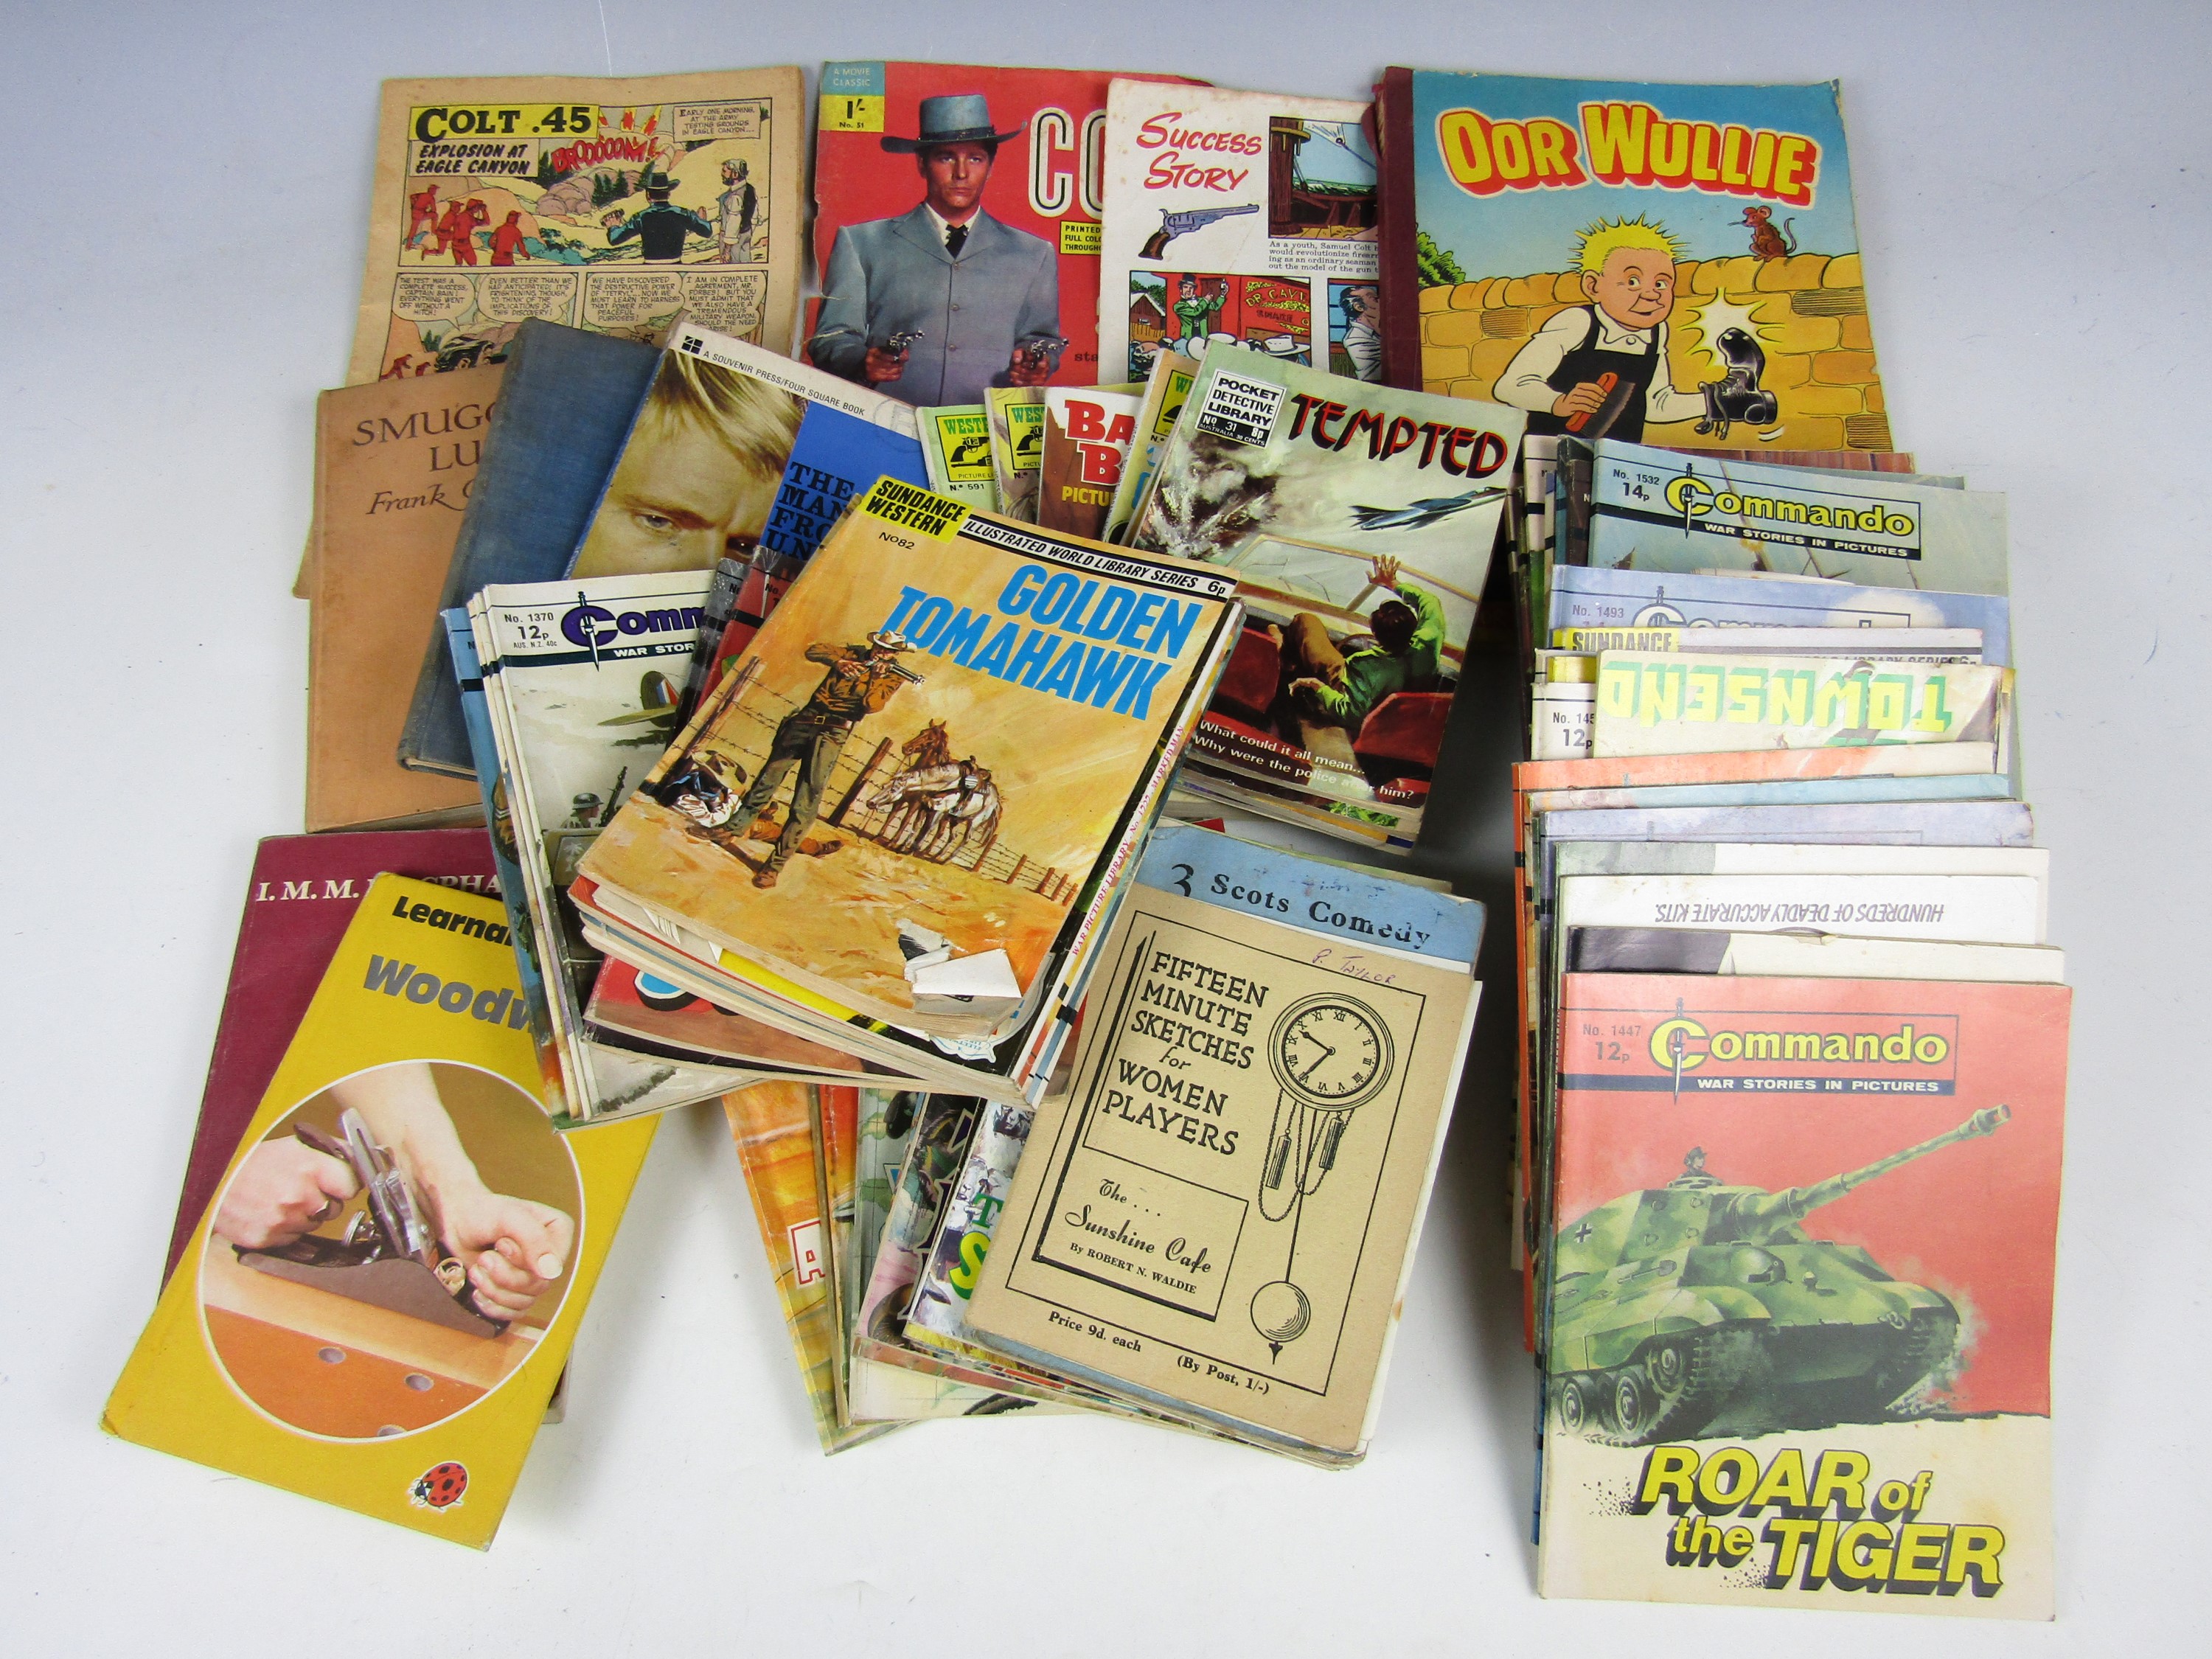 A large quantity of vintage annuals and books including Commando and Oor Wullie etc.